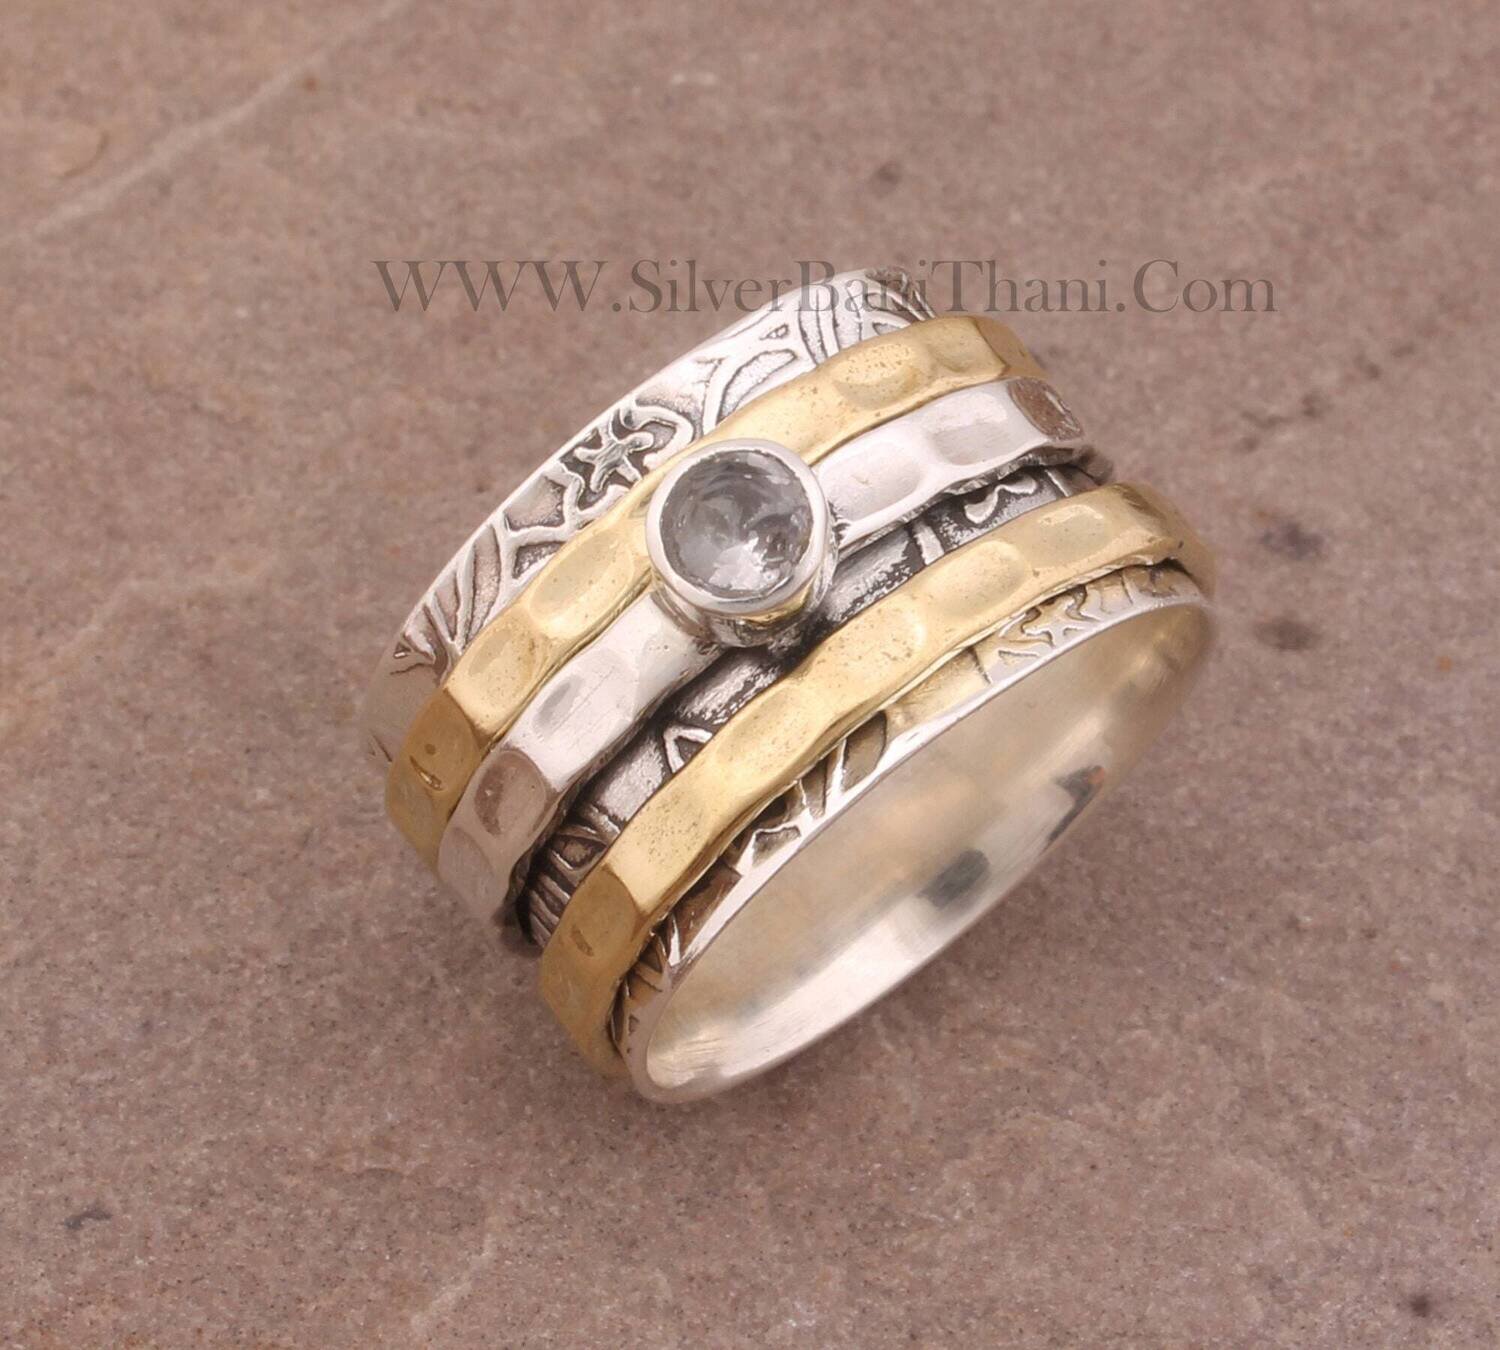 Crystal Quartz Silver Stone Spinner Ring | 925 Sterling Silver Two Tone Engraver Silver band Ring | Handmade Ring | Thumb Ring Gift